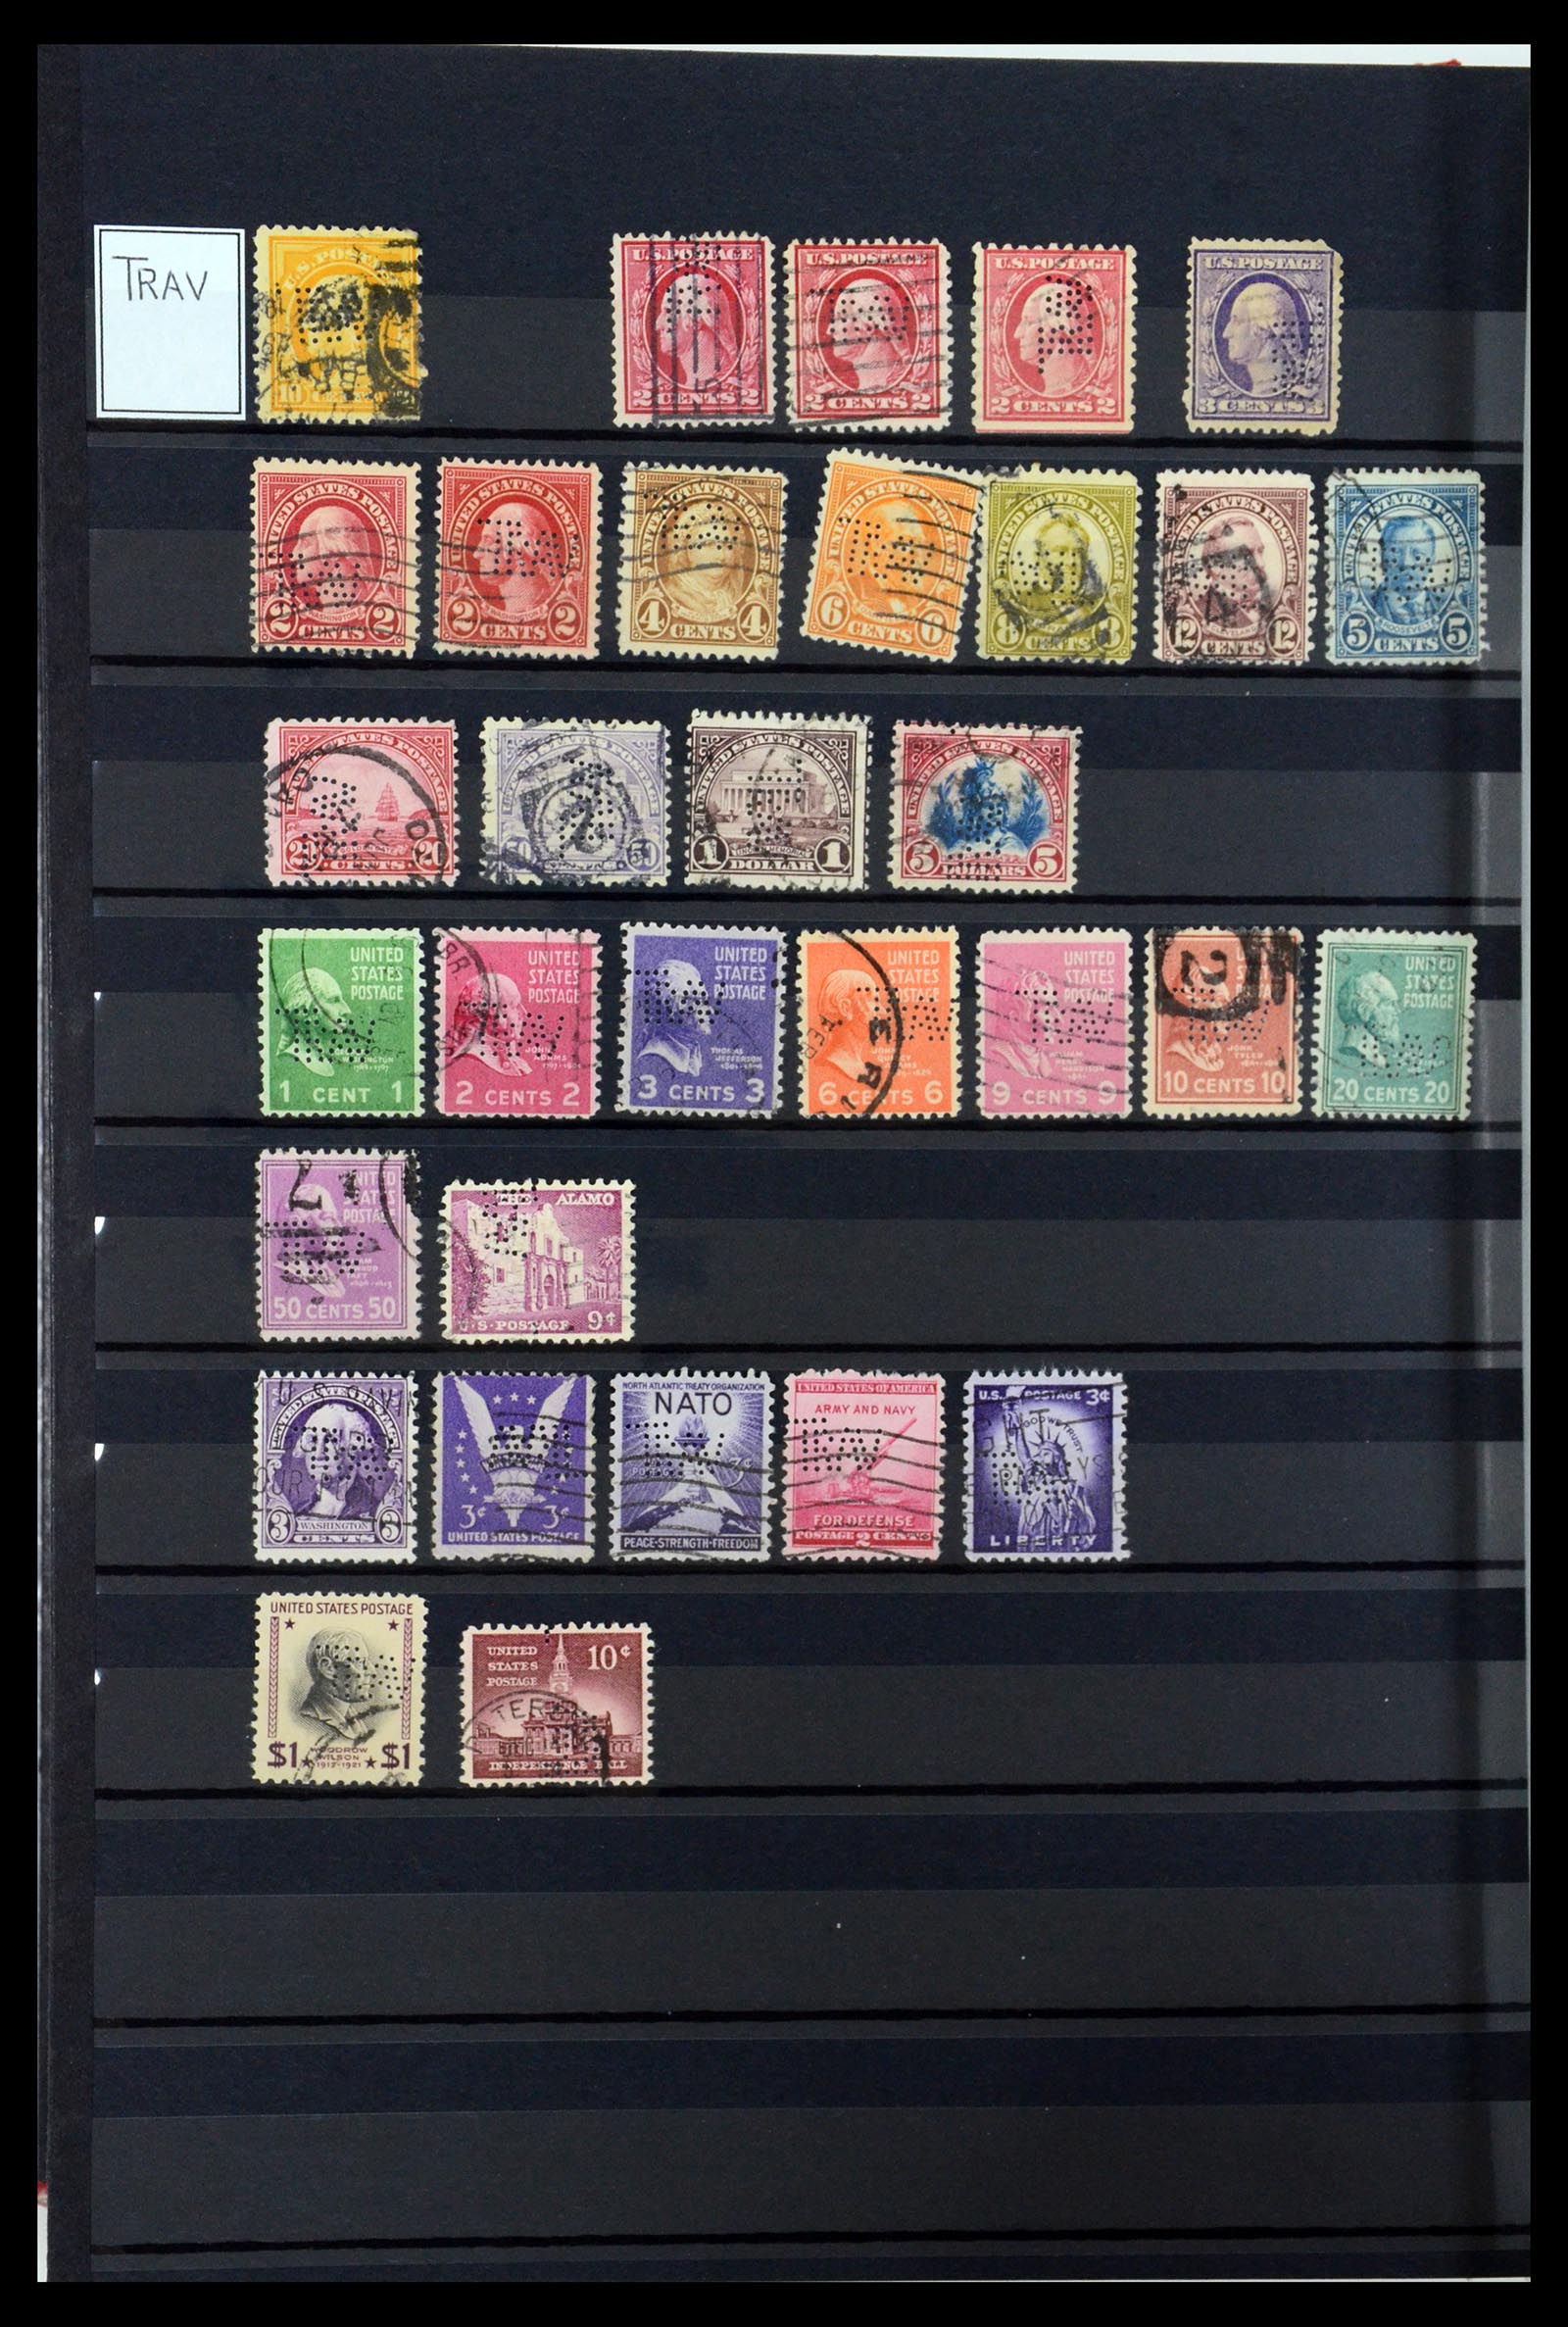 36388 138 - Stamp collection 36388 USA perfins.